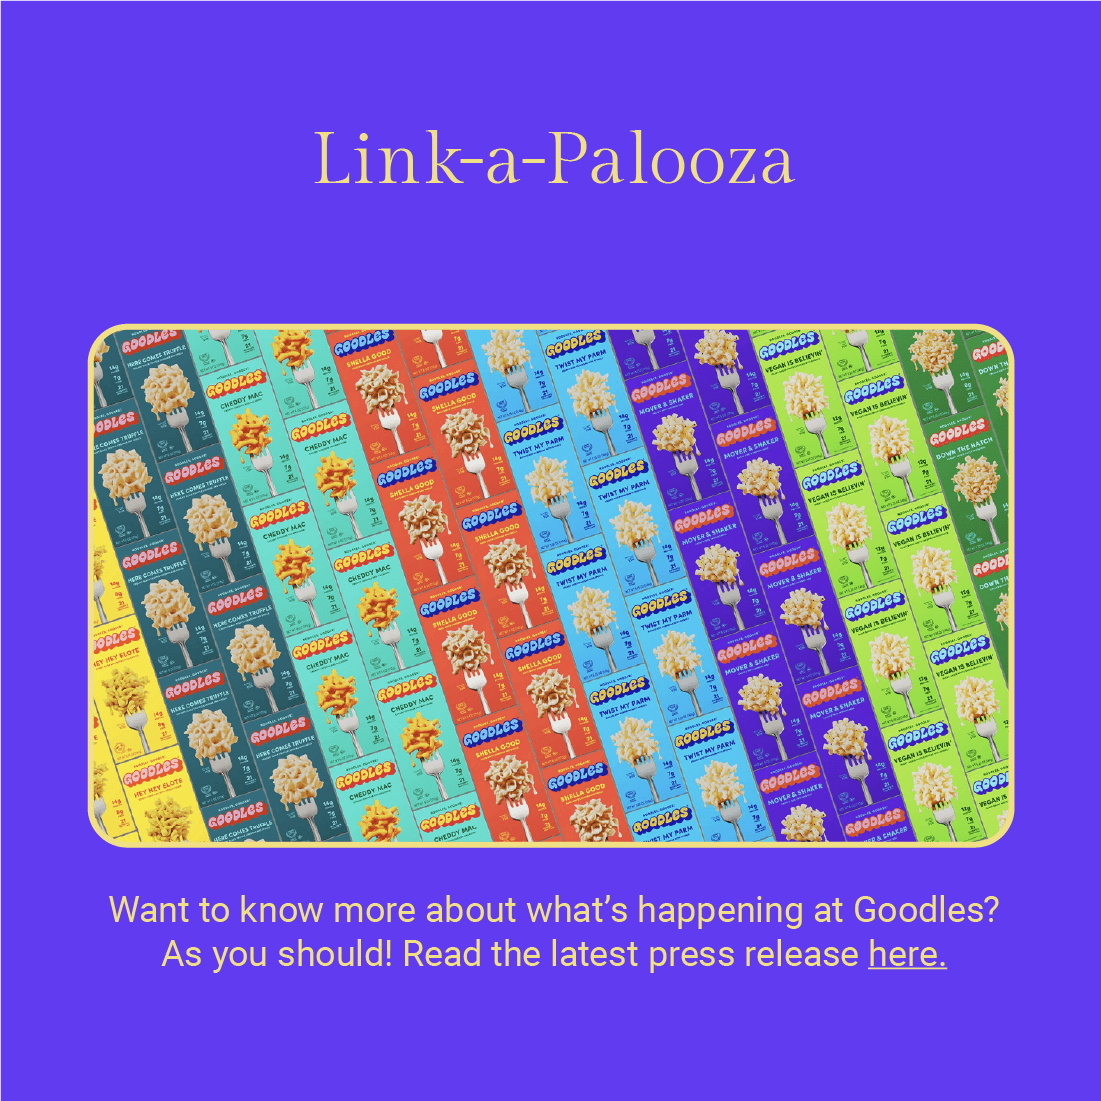 The graphic has a vibrant blue background and is titled 'Link-a-Palooza' in bold, white text at the top. Below the title is a pattern of boxed GOODLES macaroni and cheese products in an assortment of bright colors like orange, blue, yellow, and green. At the bottom of the image, there's a message in white text that says 'Want to know more about what’s happening at Goodles? As you should! Read the latest press release here.' which suggests that the text is a hyperlink on a website or digital document.